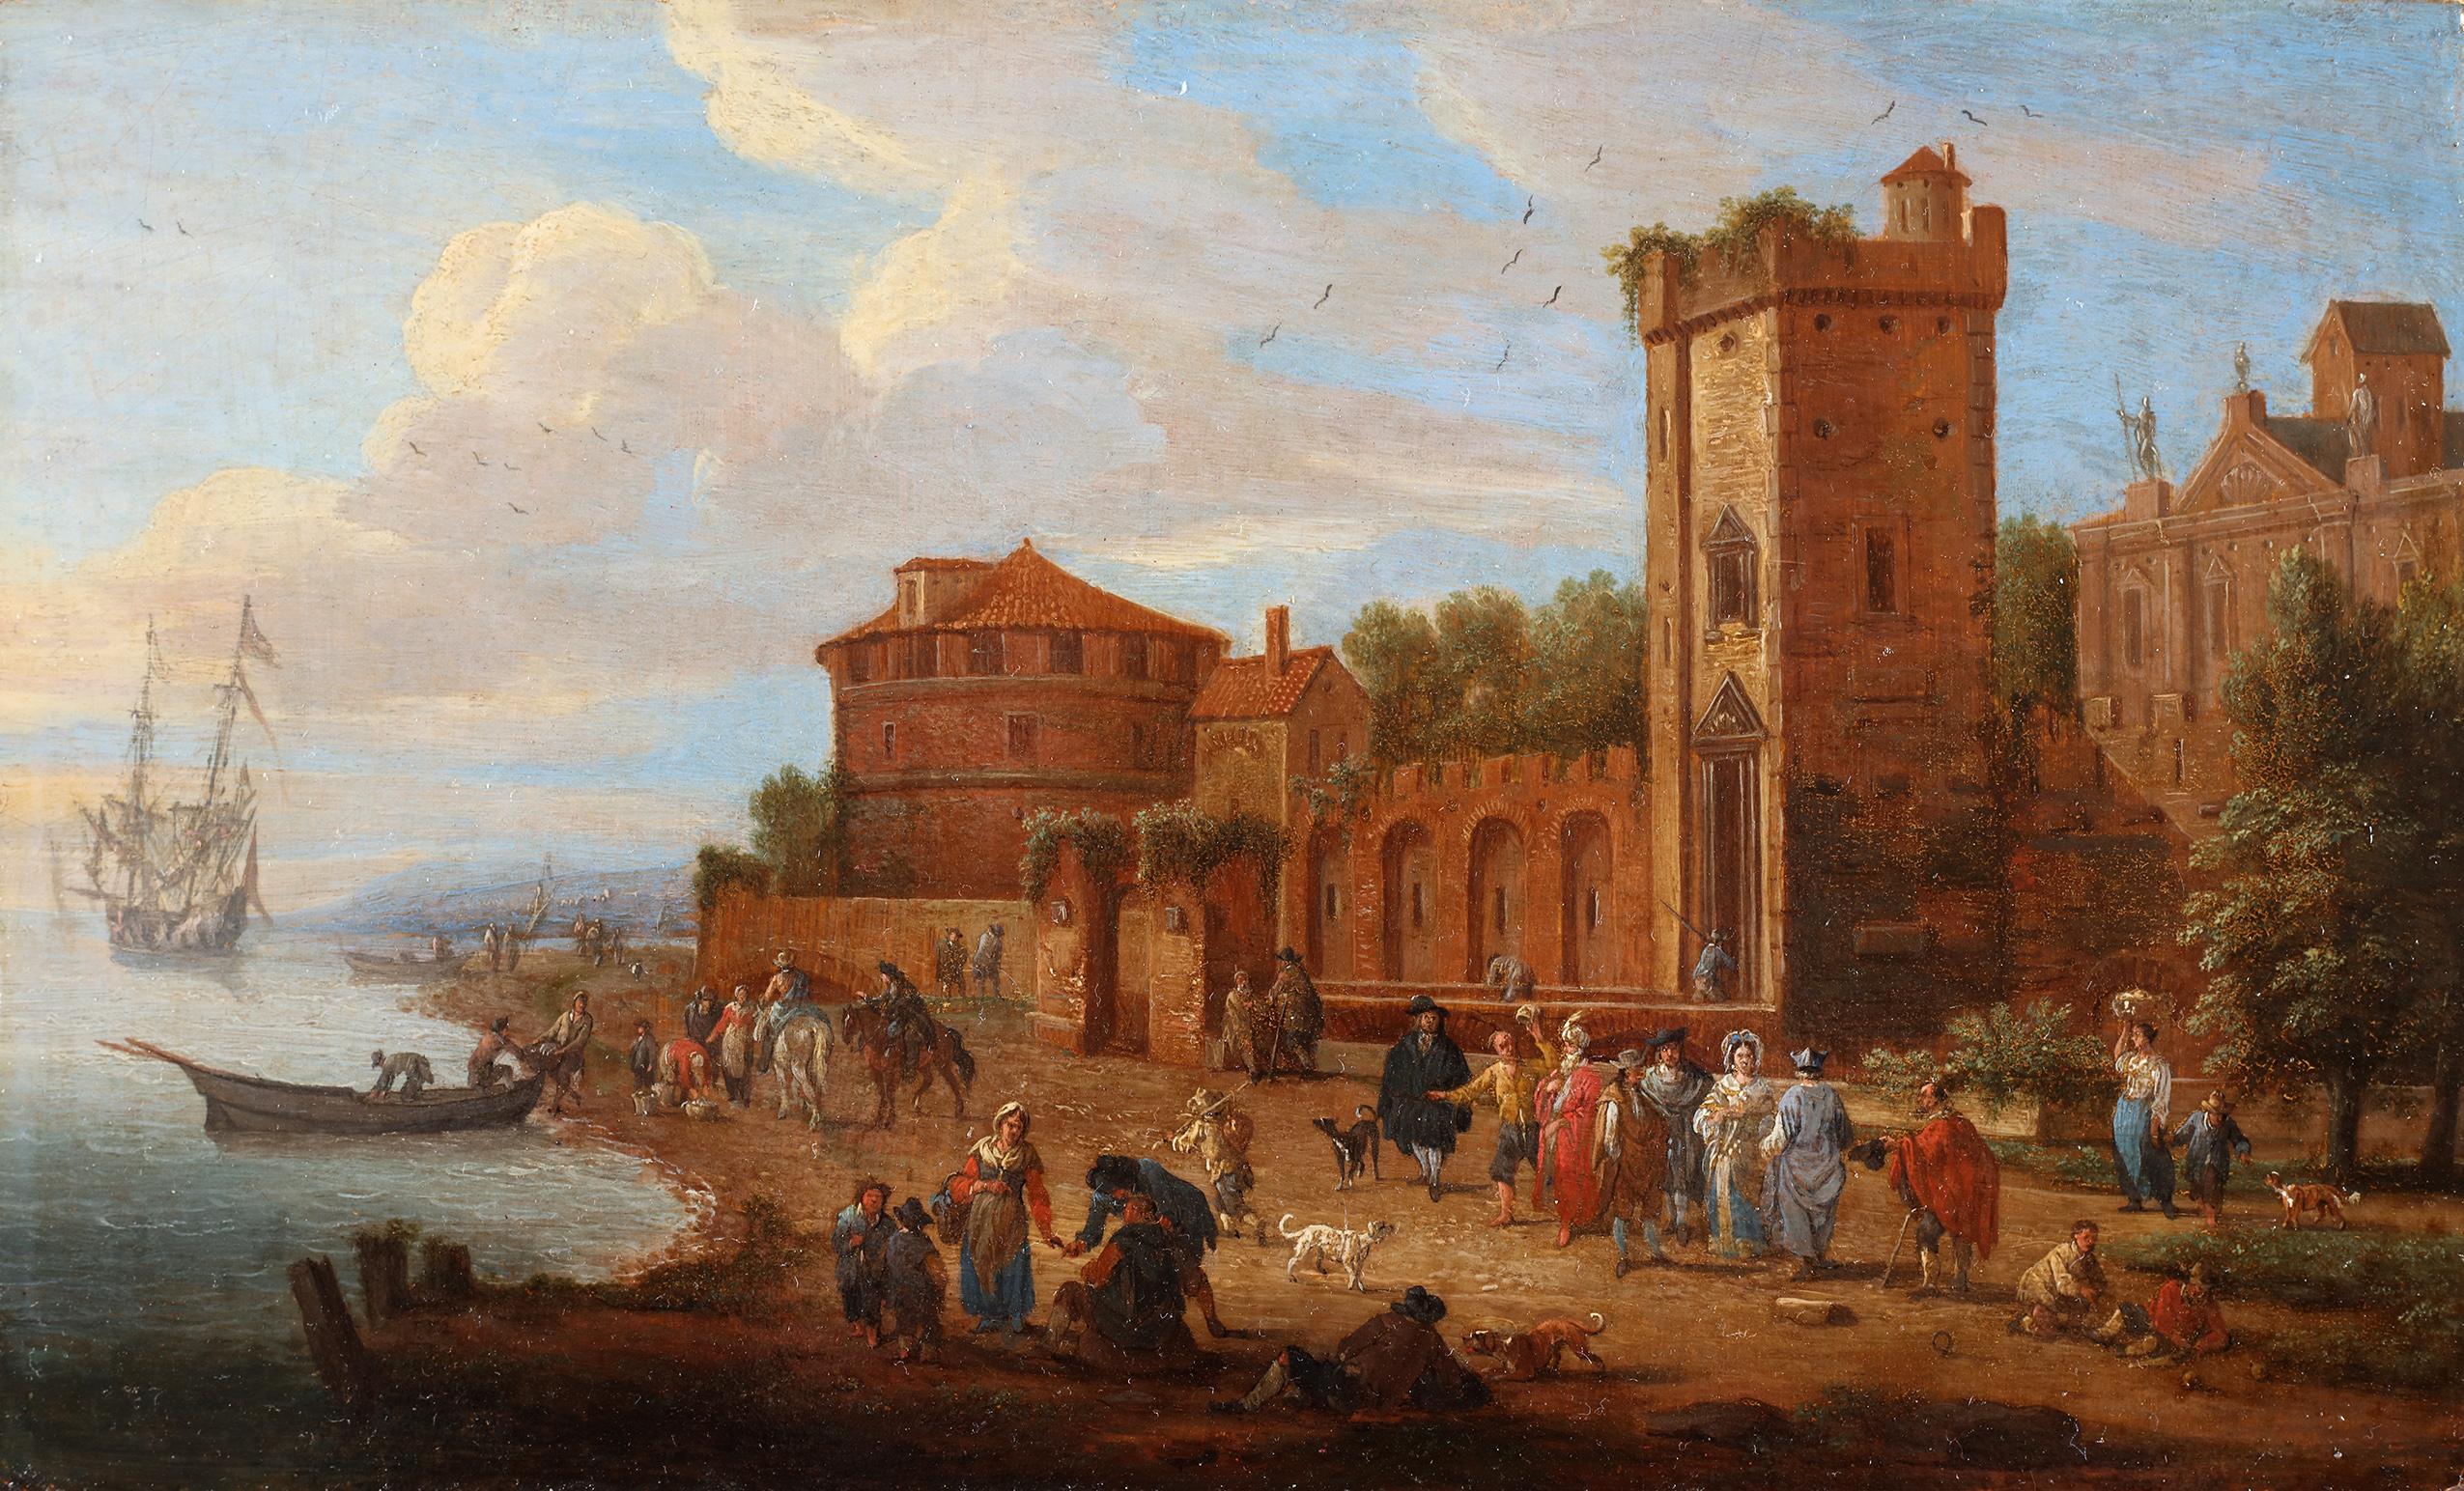 Mathijs Schoevaerdts Landscape Painting - Animated harbor scene near a fortified palace - Matthijs Schoevaerdts